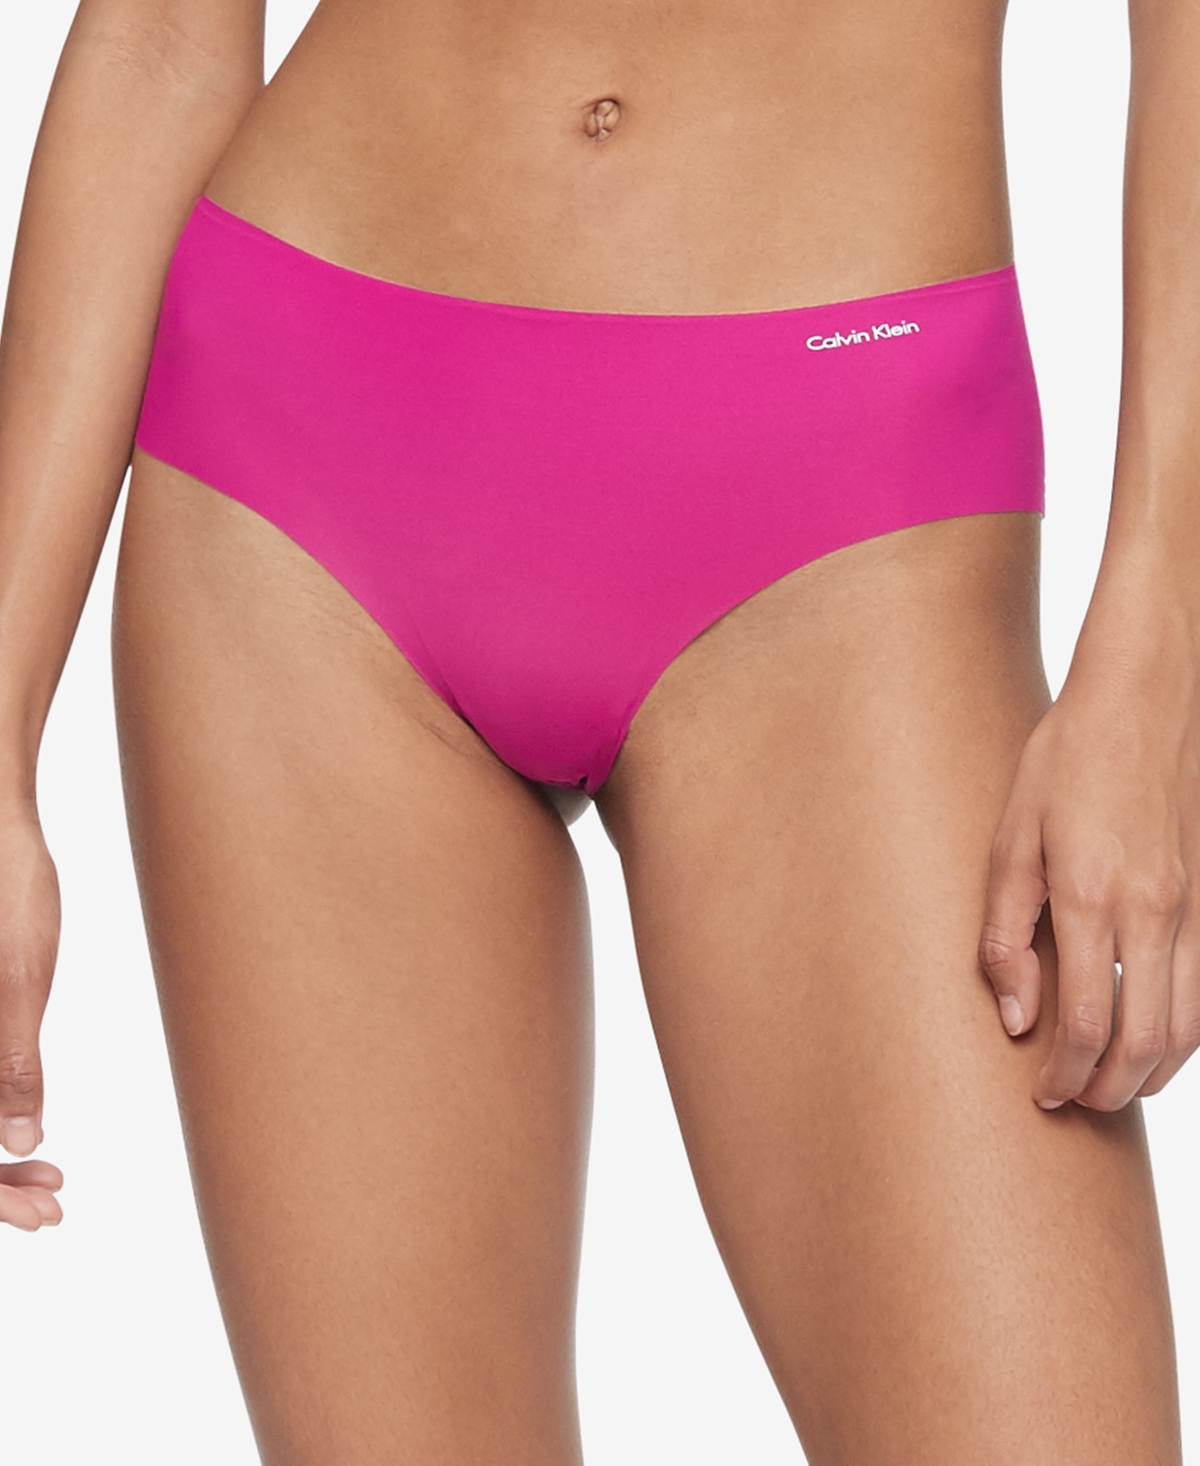 Calvin Klein Invisibles Hipster Panty Style D3429